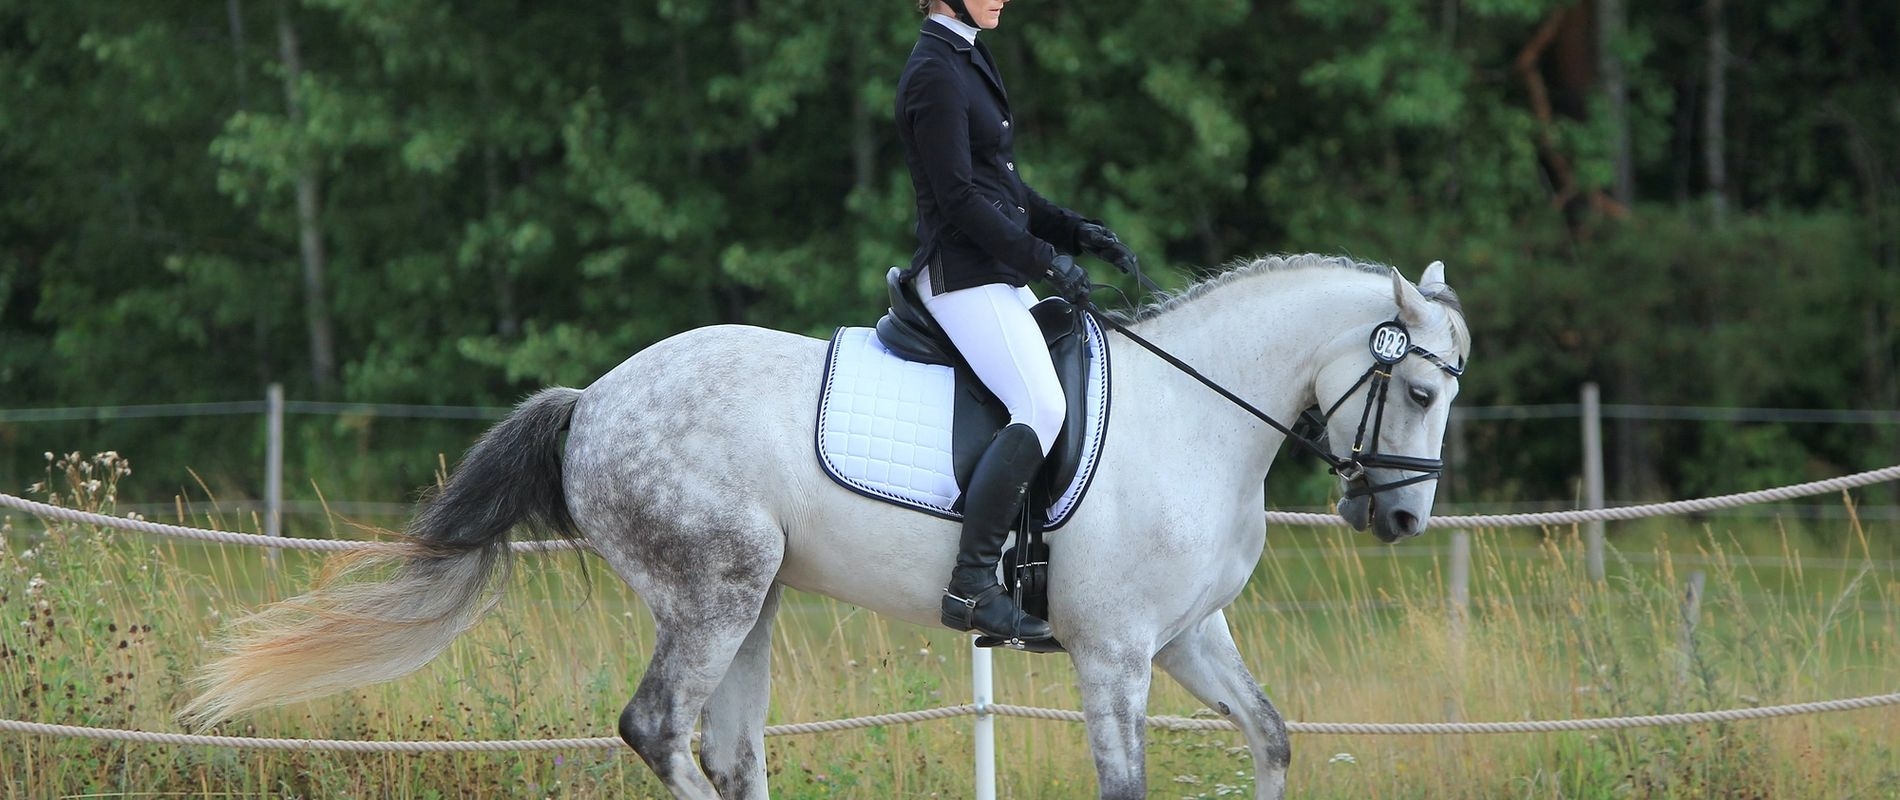 Rider doing lower level dressage on grey horse in dressage ring